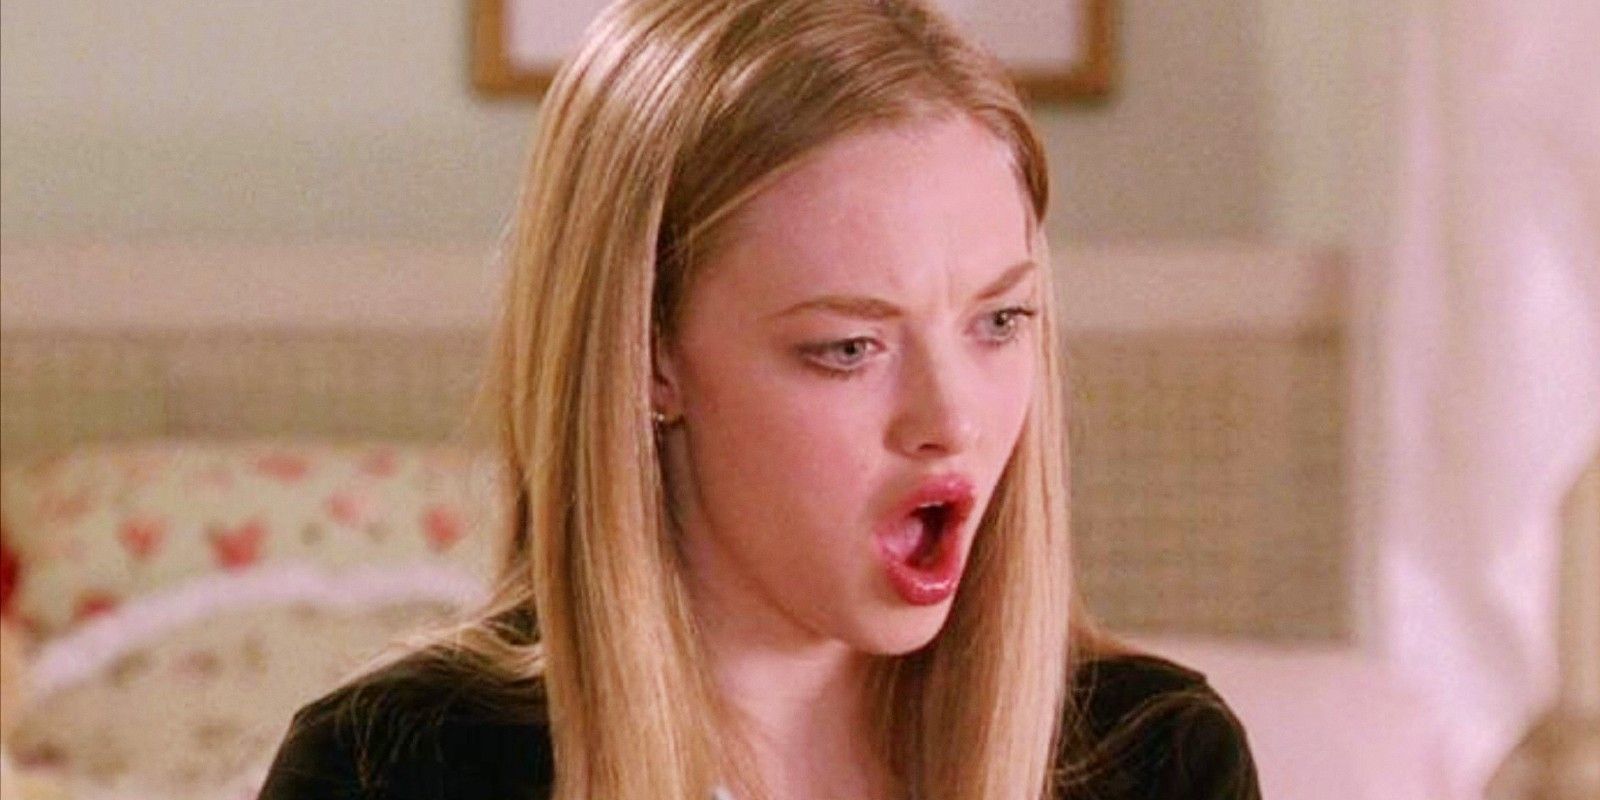 Amanda Seyfried as Karen in Mean Girls with the surprise of her mouth